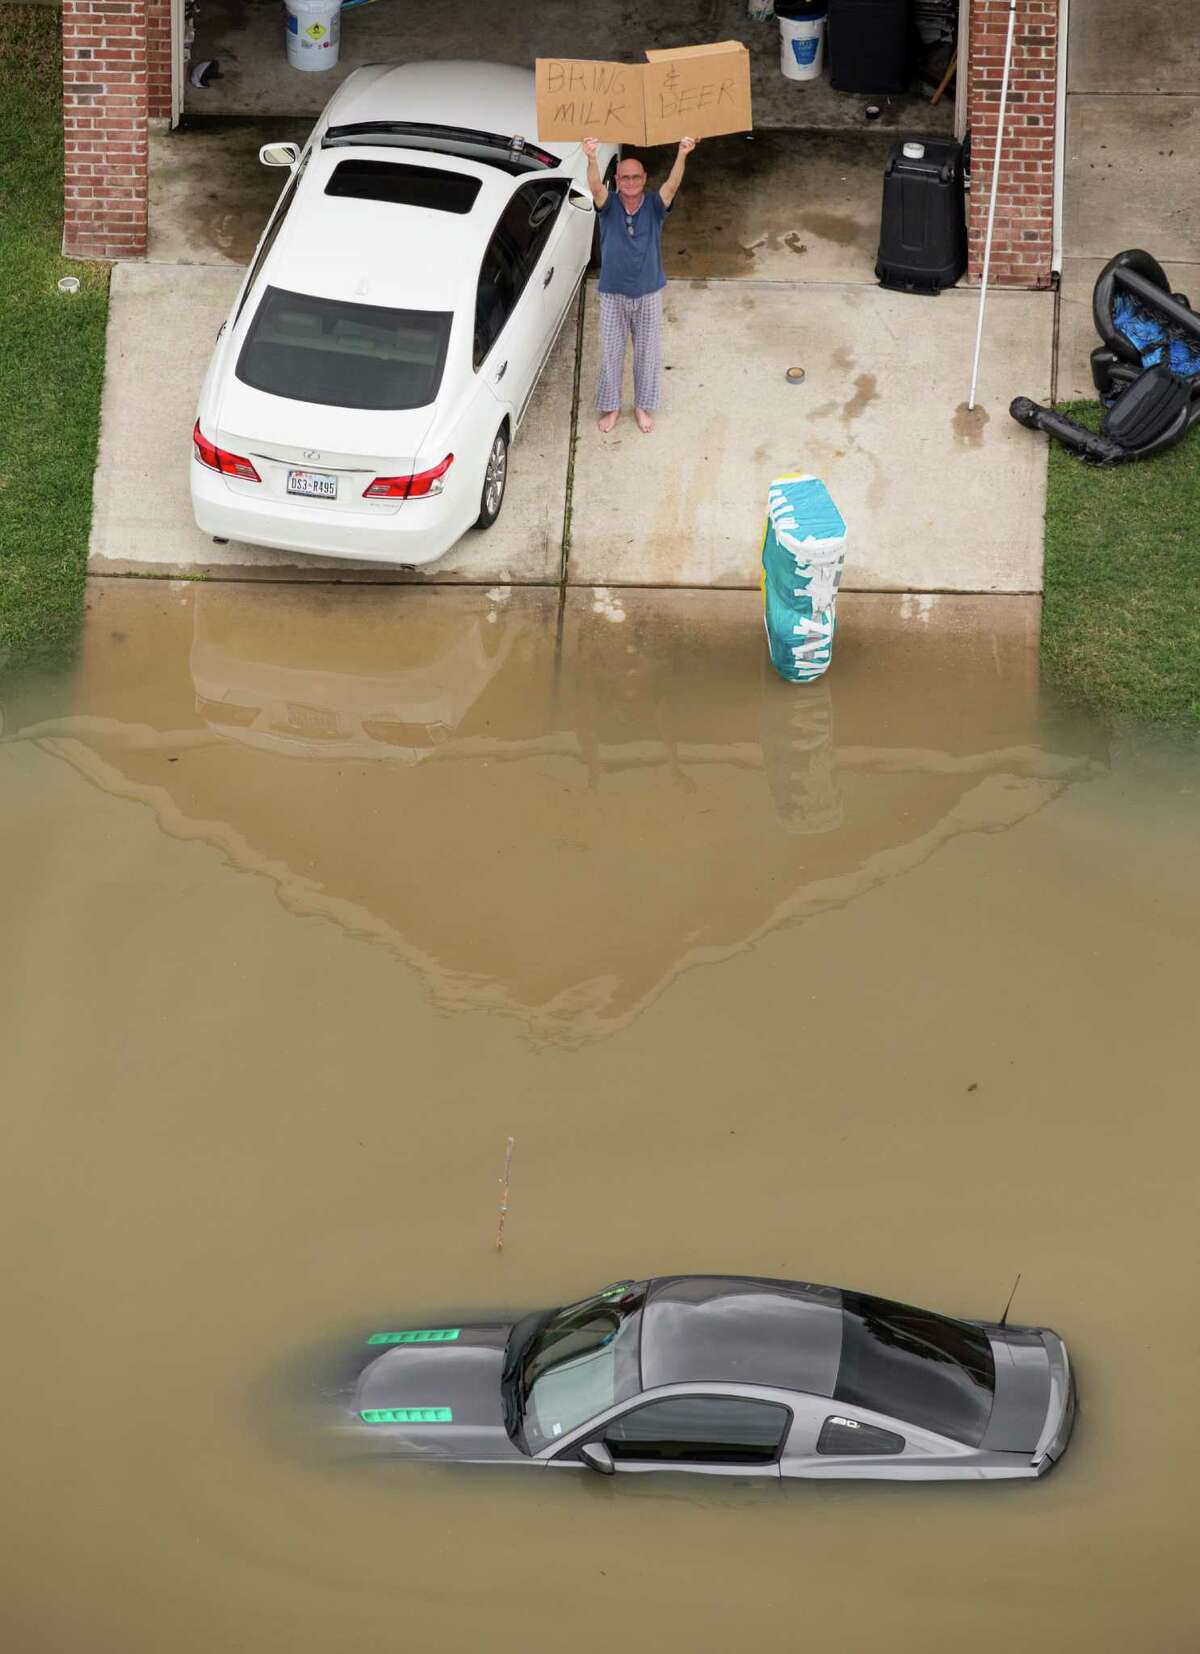 A man holds up a sign saying, "Bring Milk & Beer" as floodwaters creep close to a house last week in the Wimbledon Champions Park subdivision﻿.